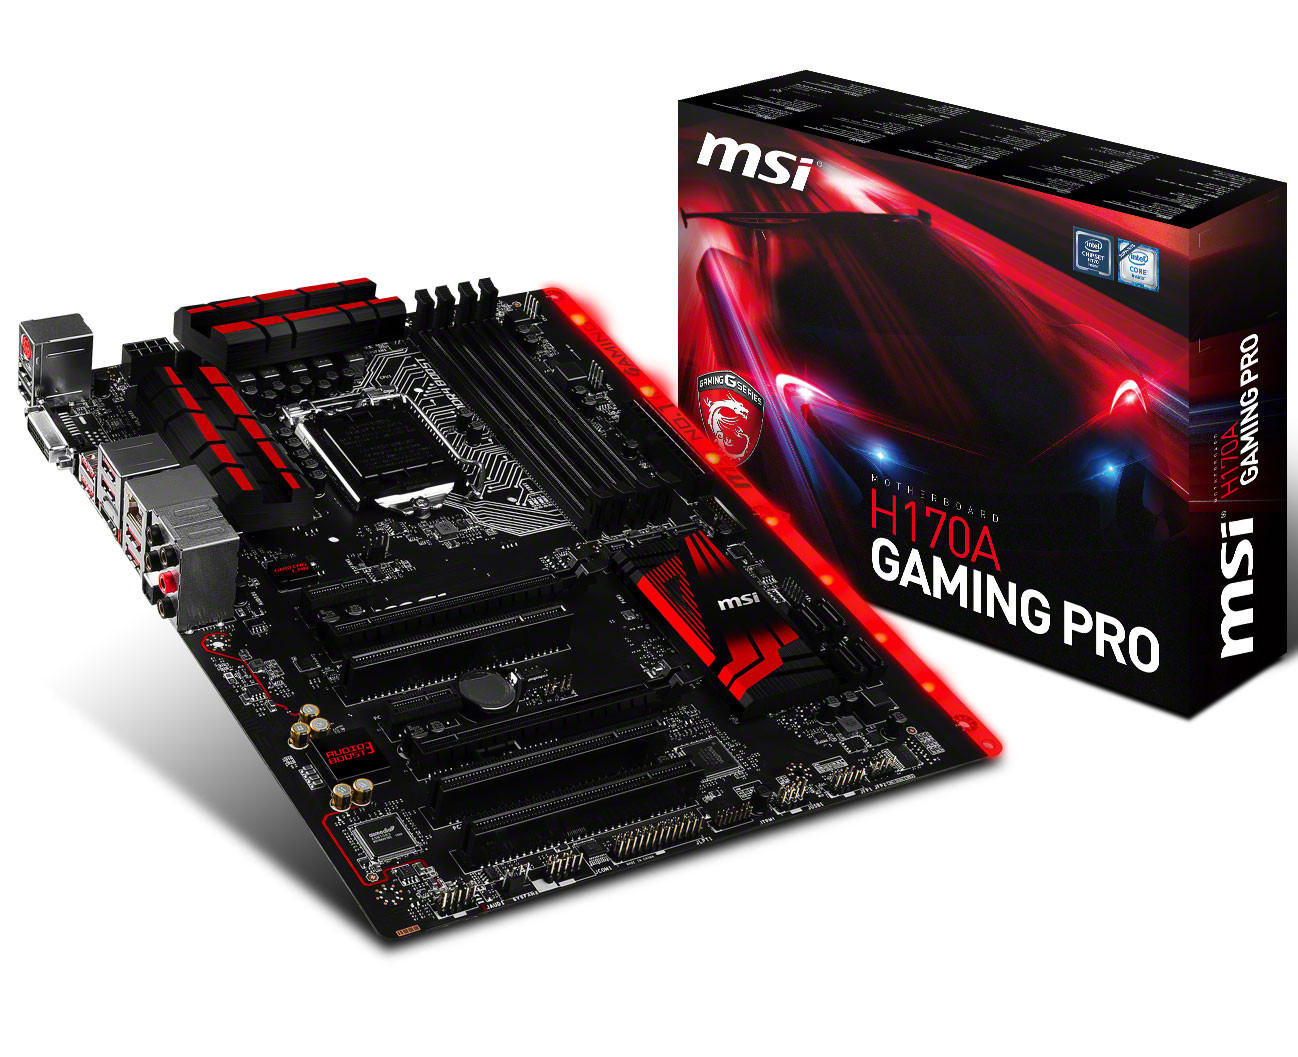 MSI Also Announces H170 and B150 Based Gaming Series Motherboards